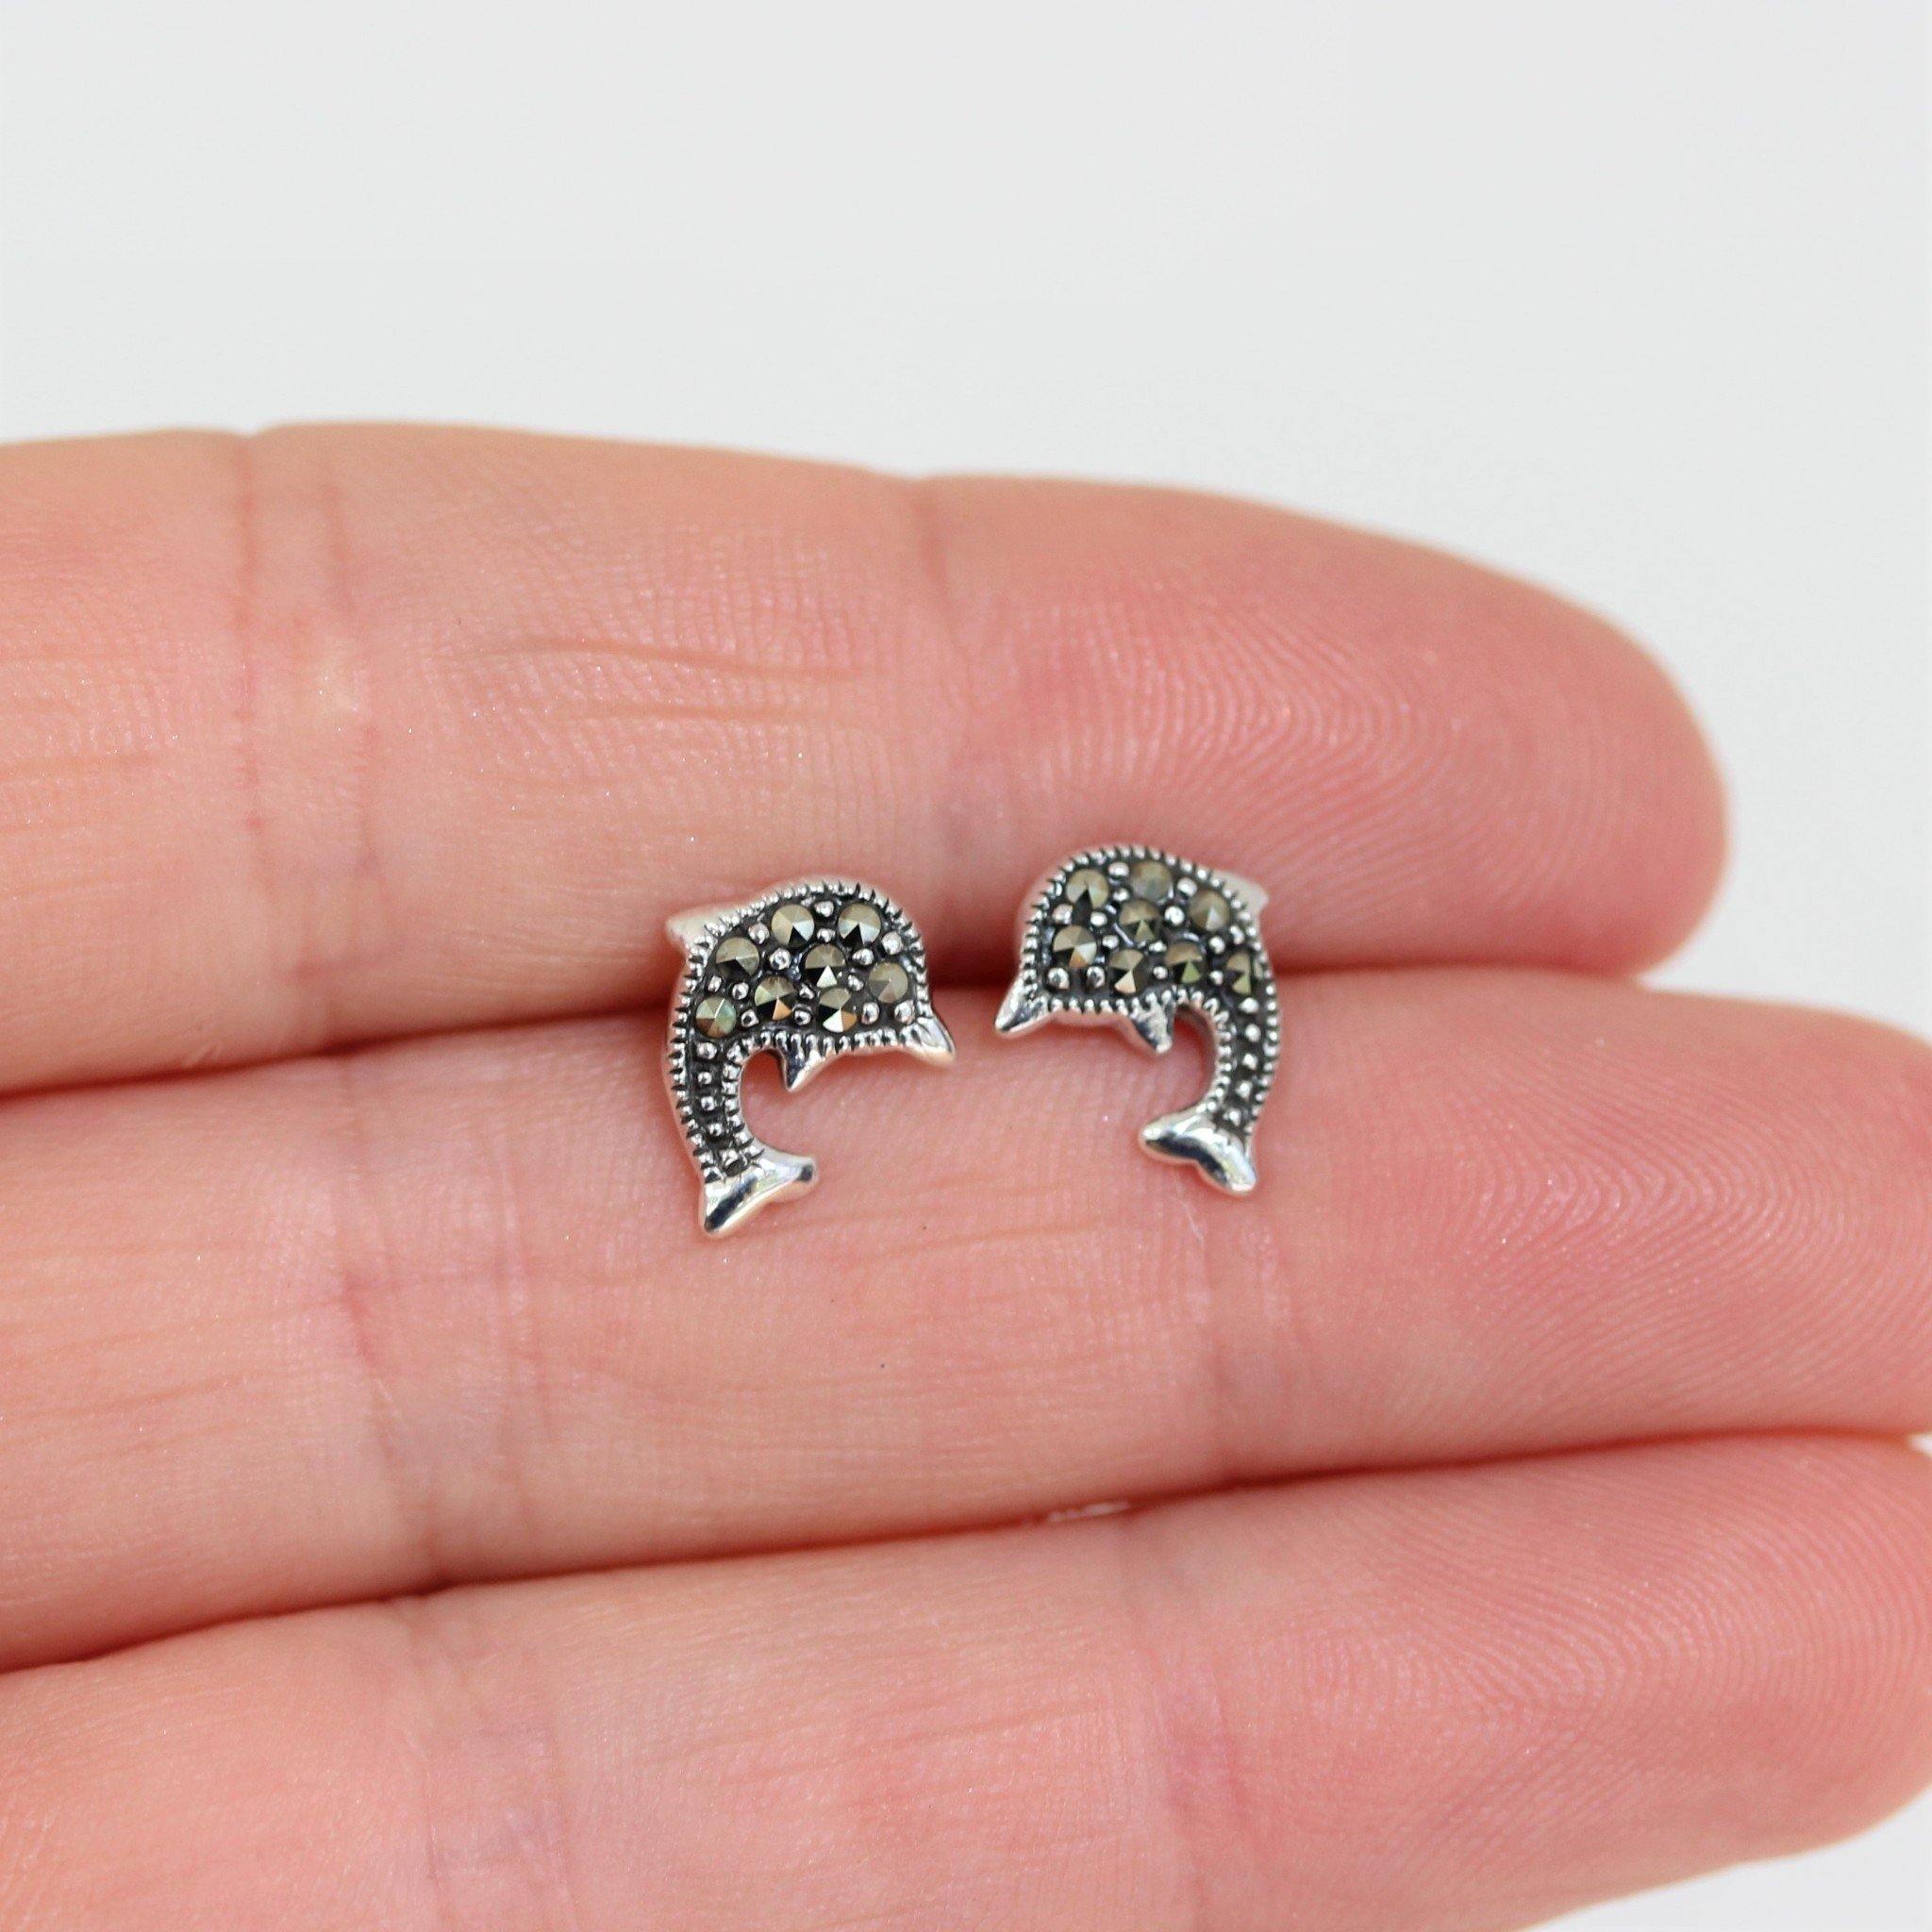 Sterling Silver Marcasite Vintage Style Dolphin Marine Animal Stud Earrings - STERLING SILVER DESIGNS